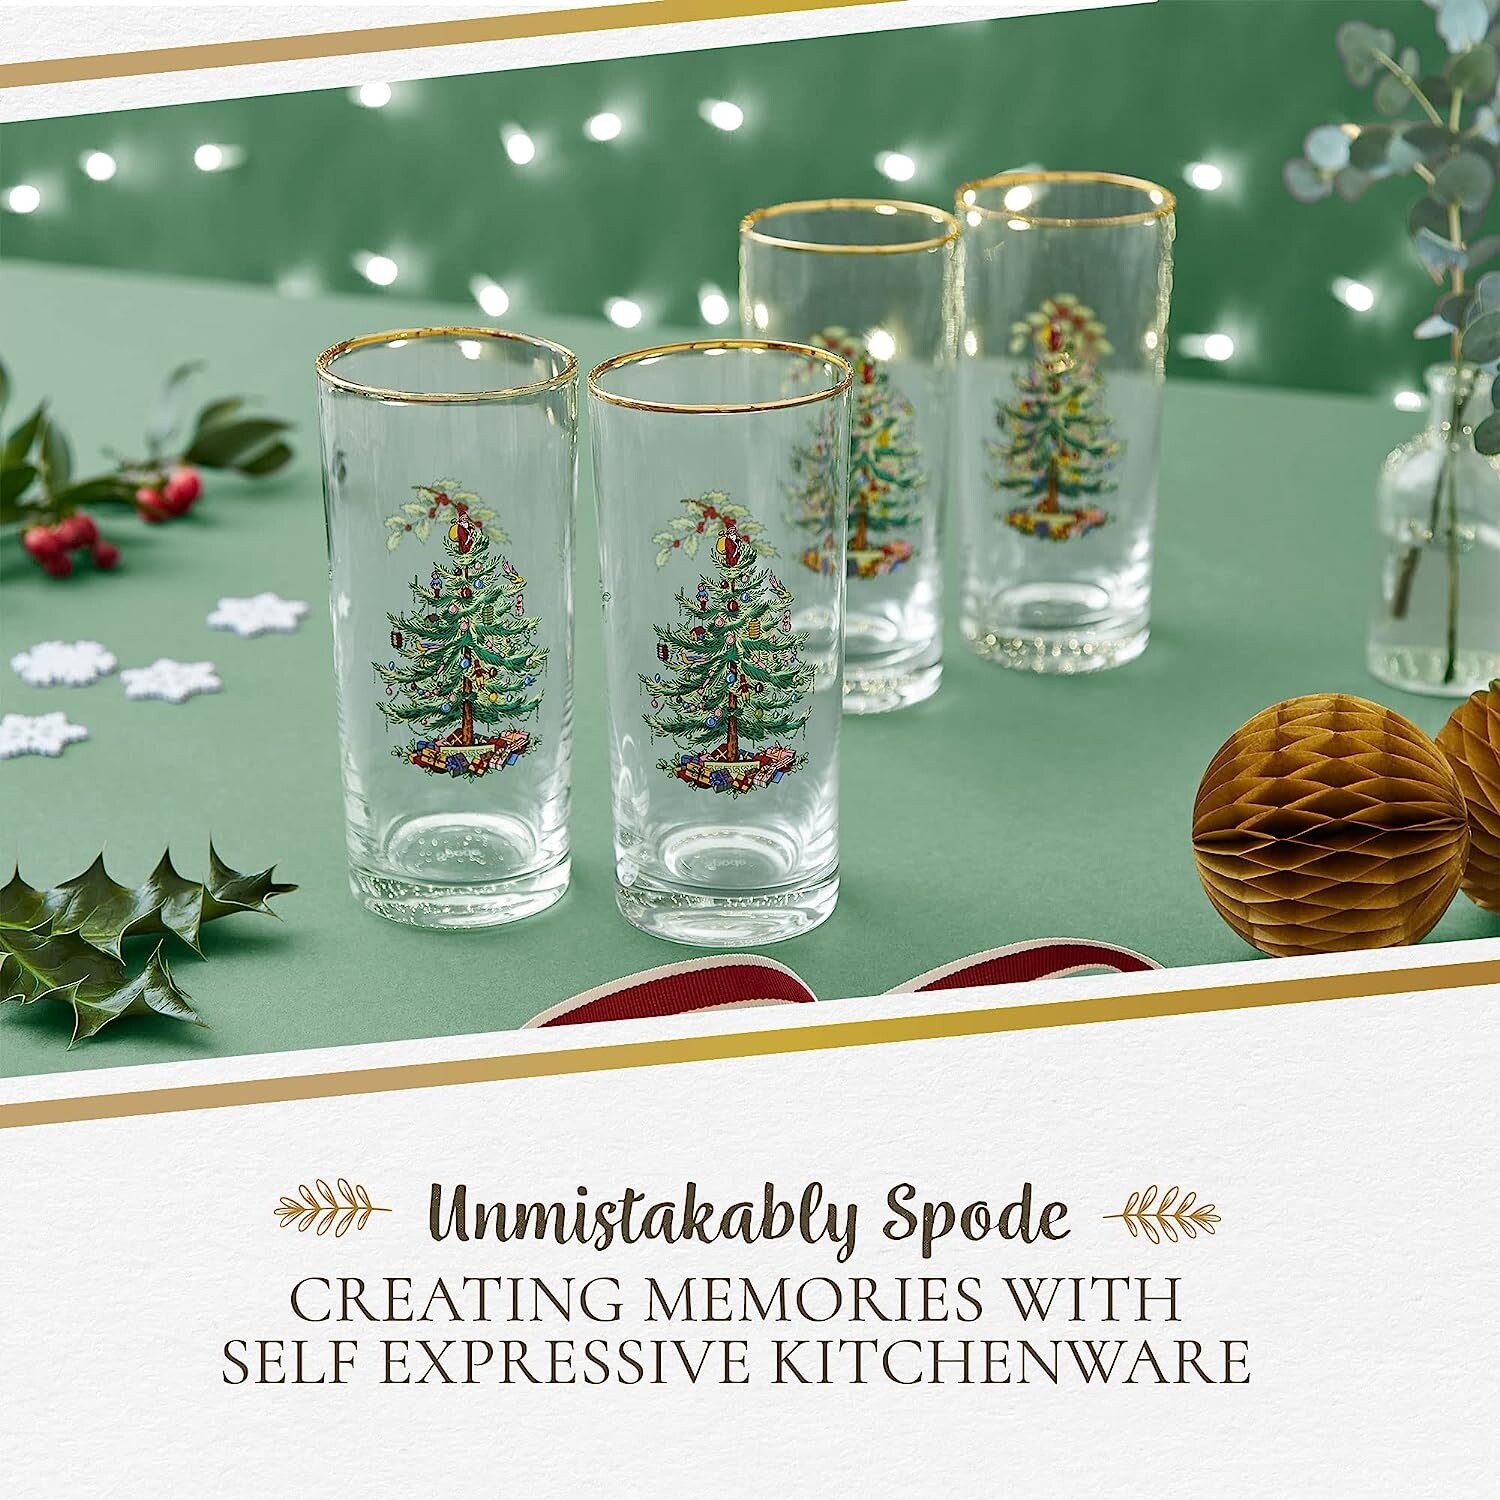 https://ak1.ostkcdn.com/images/products/is/images/direct/72017c0b4f2c2c8fd18b8ee02585f4e426113dbd/Spode-Christmas-Tree-Highballs-with-Gold-Rims-Set-of-4.jpg